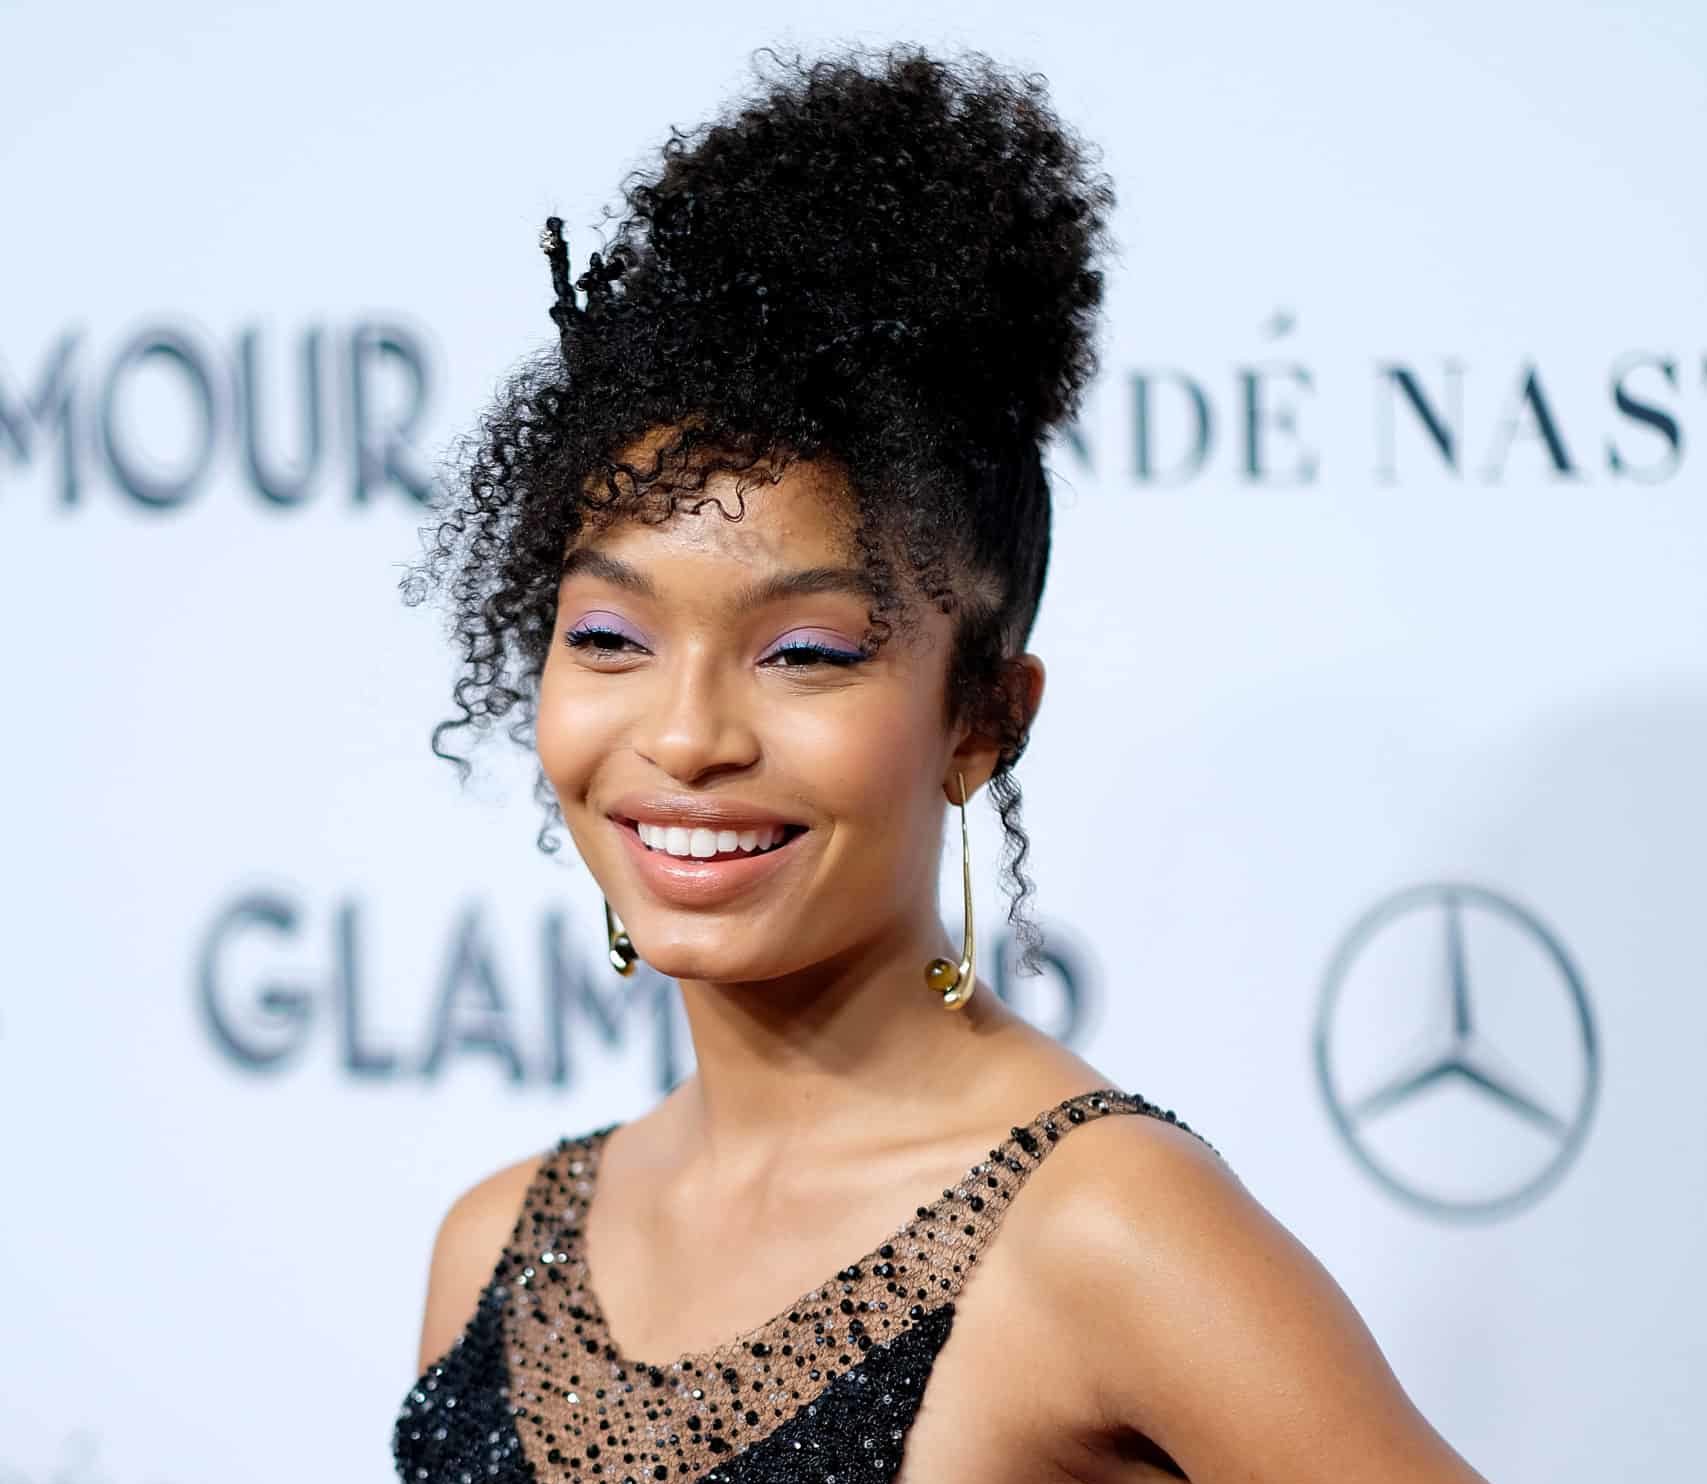 Yara Shahidi Set To Play Tinker Bell In Disney’s Live-Action Peter Pan And Wendy’